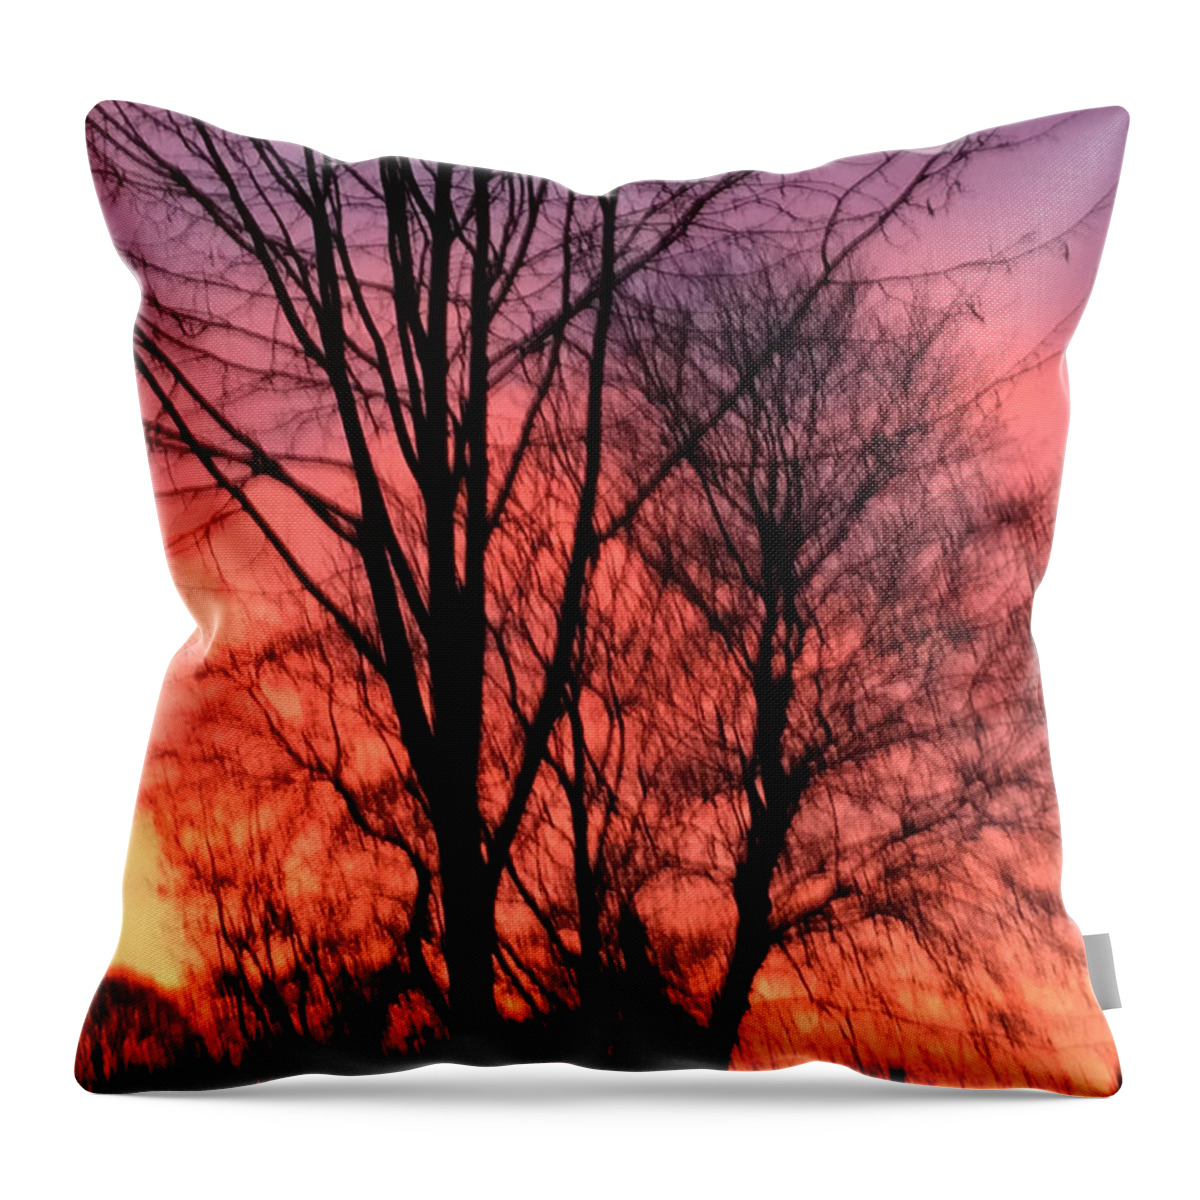 Colette Throw Pillow featuring the photograph View From Window by Colette V Hera Guggenheim